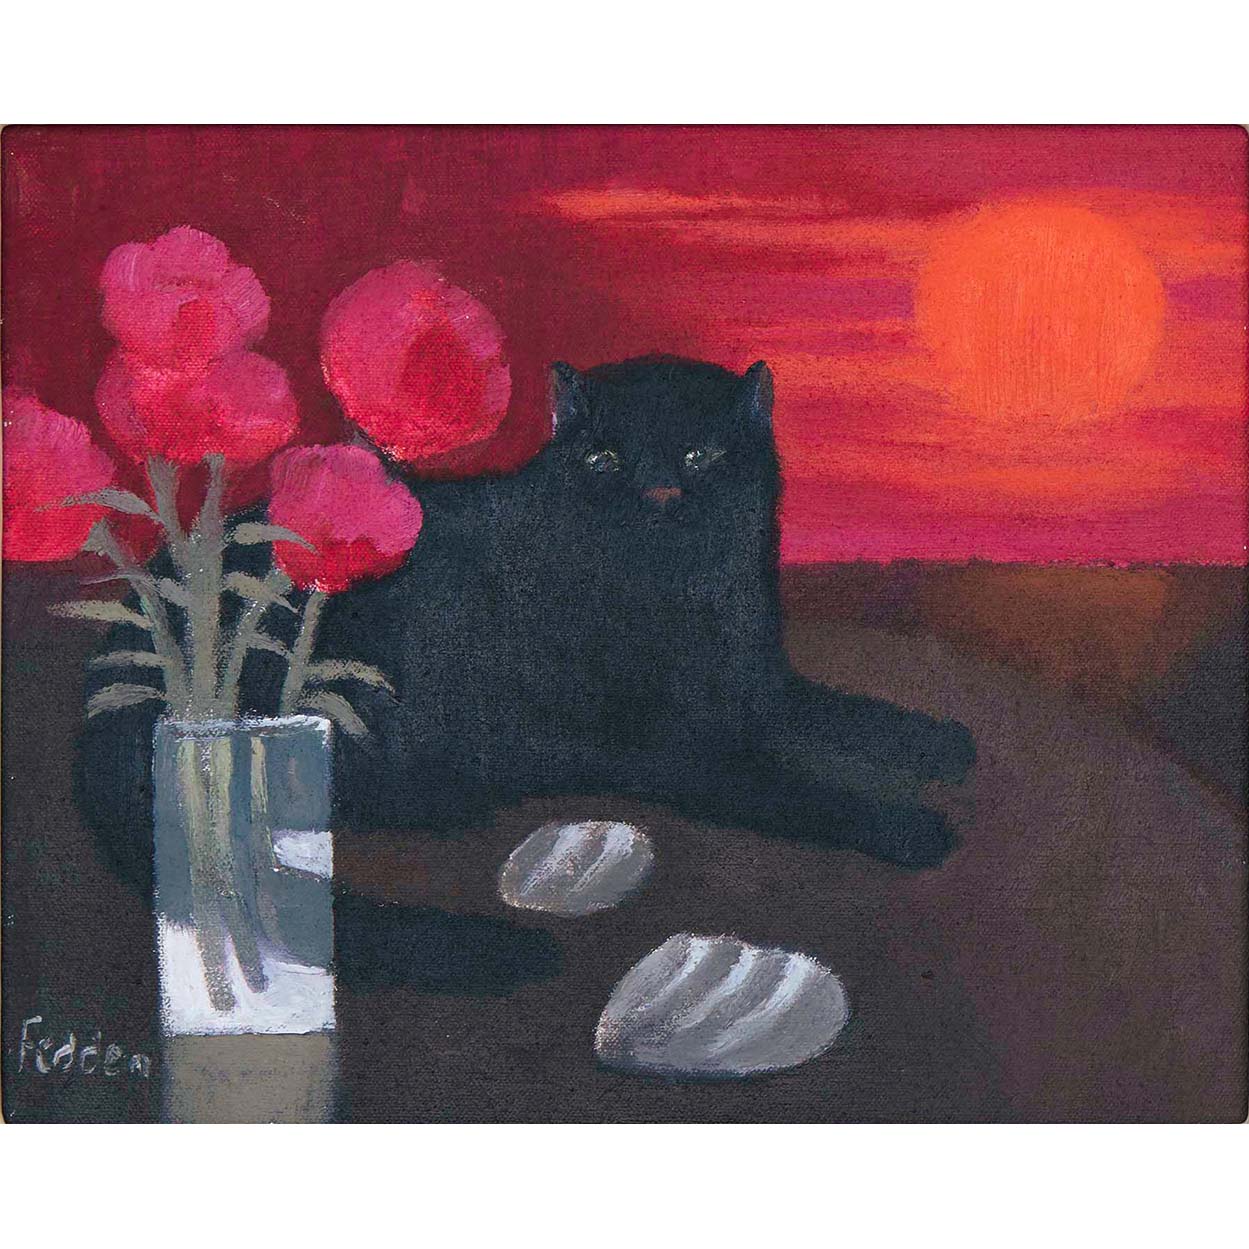 MARY FEDDEN. CAT IN THE SUNSET. 2001. SOLD